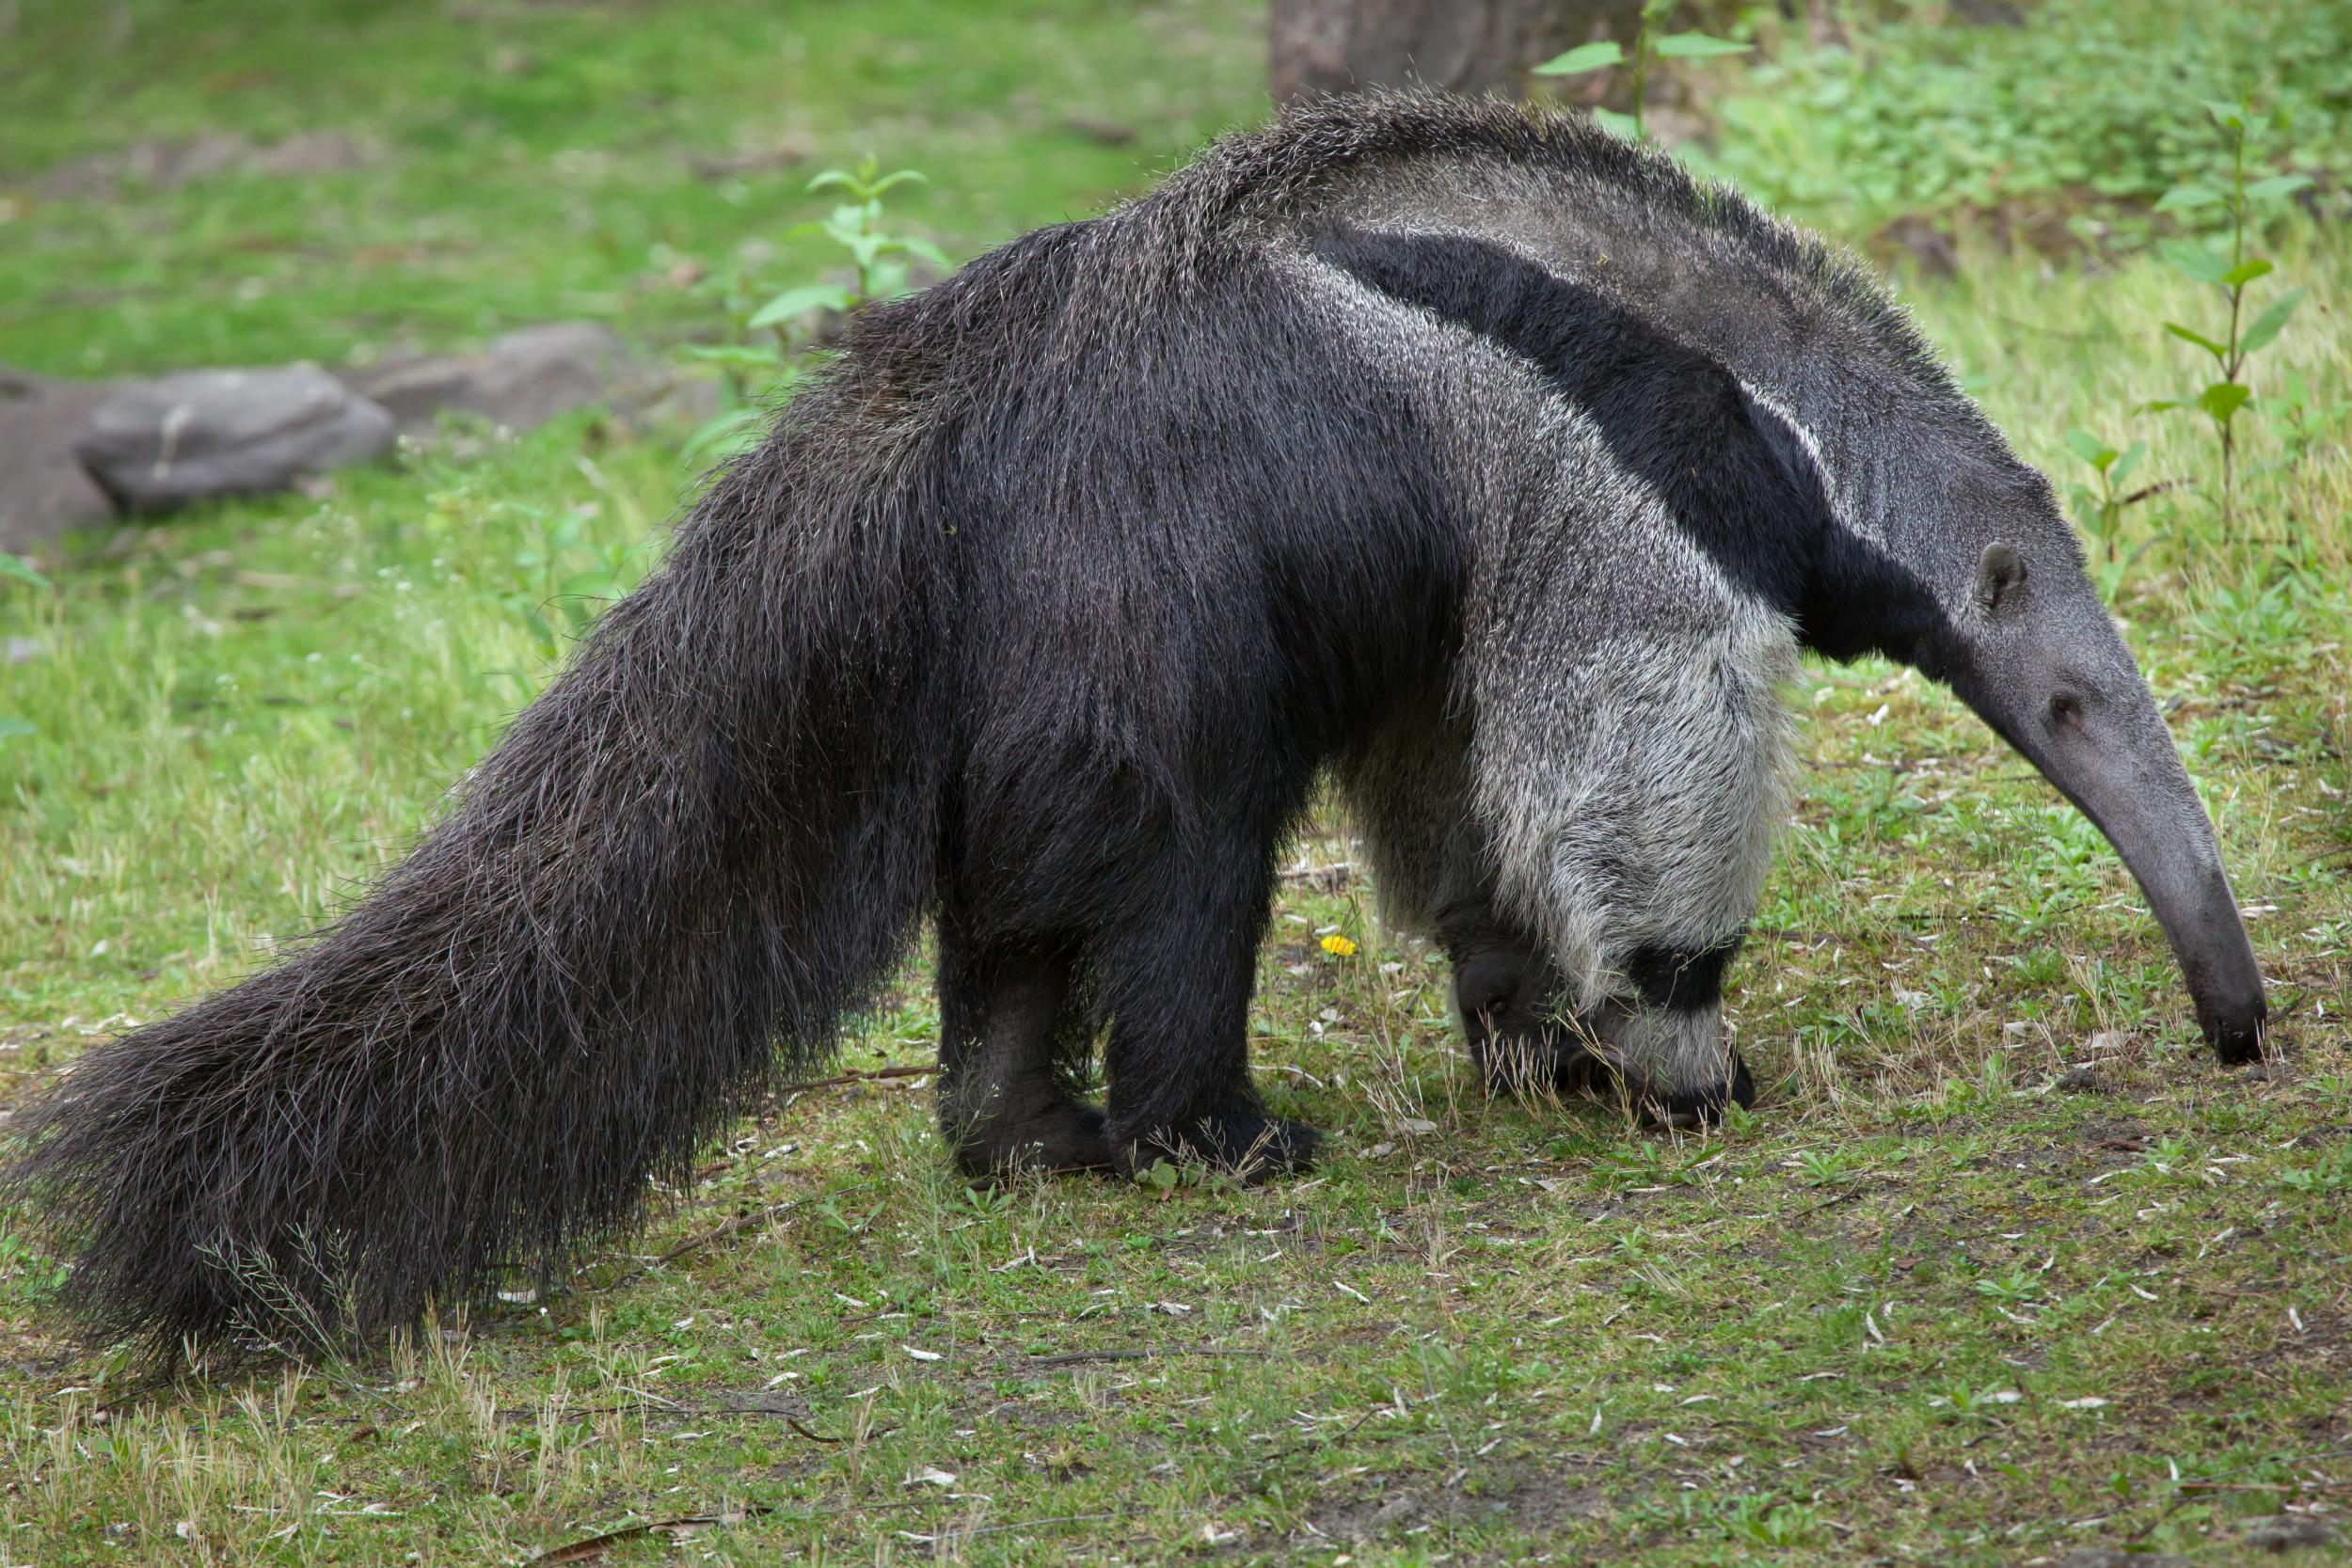 The giant anteater in Brazil is one of many species under threat due to human activity